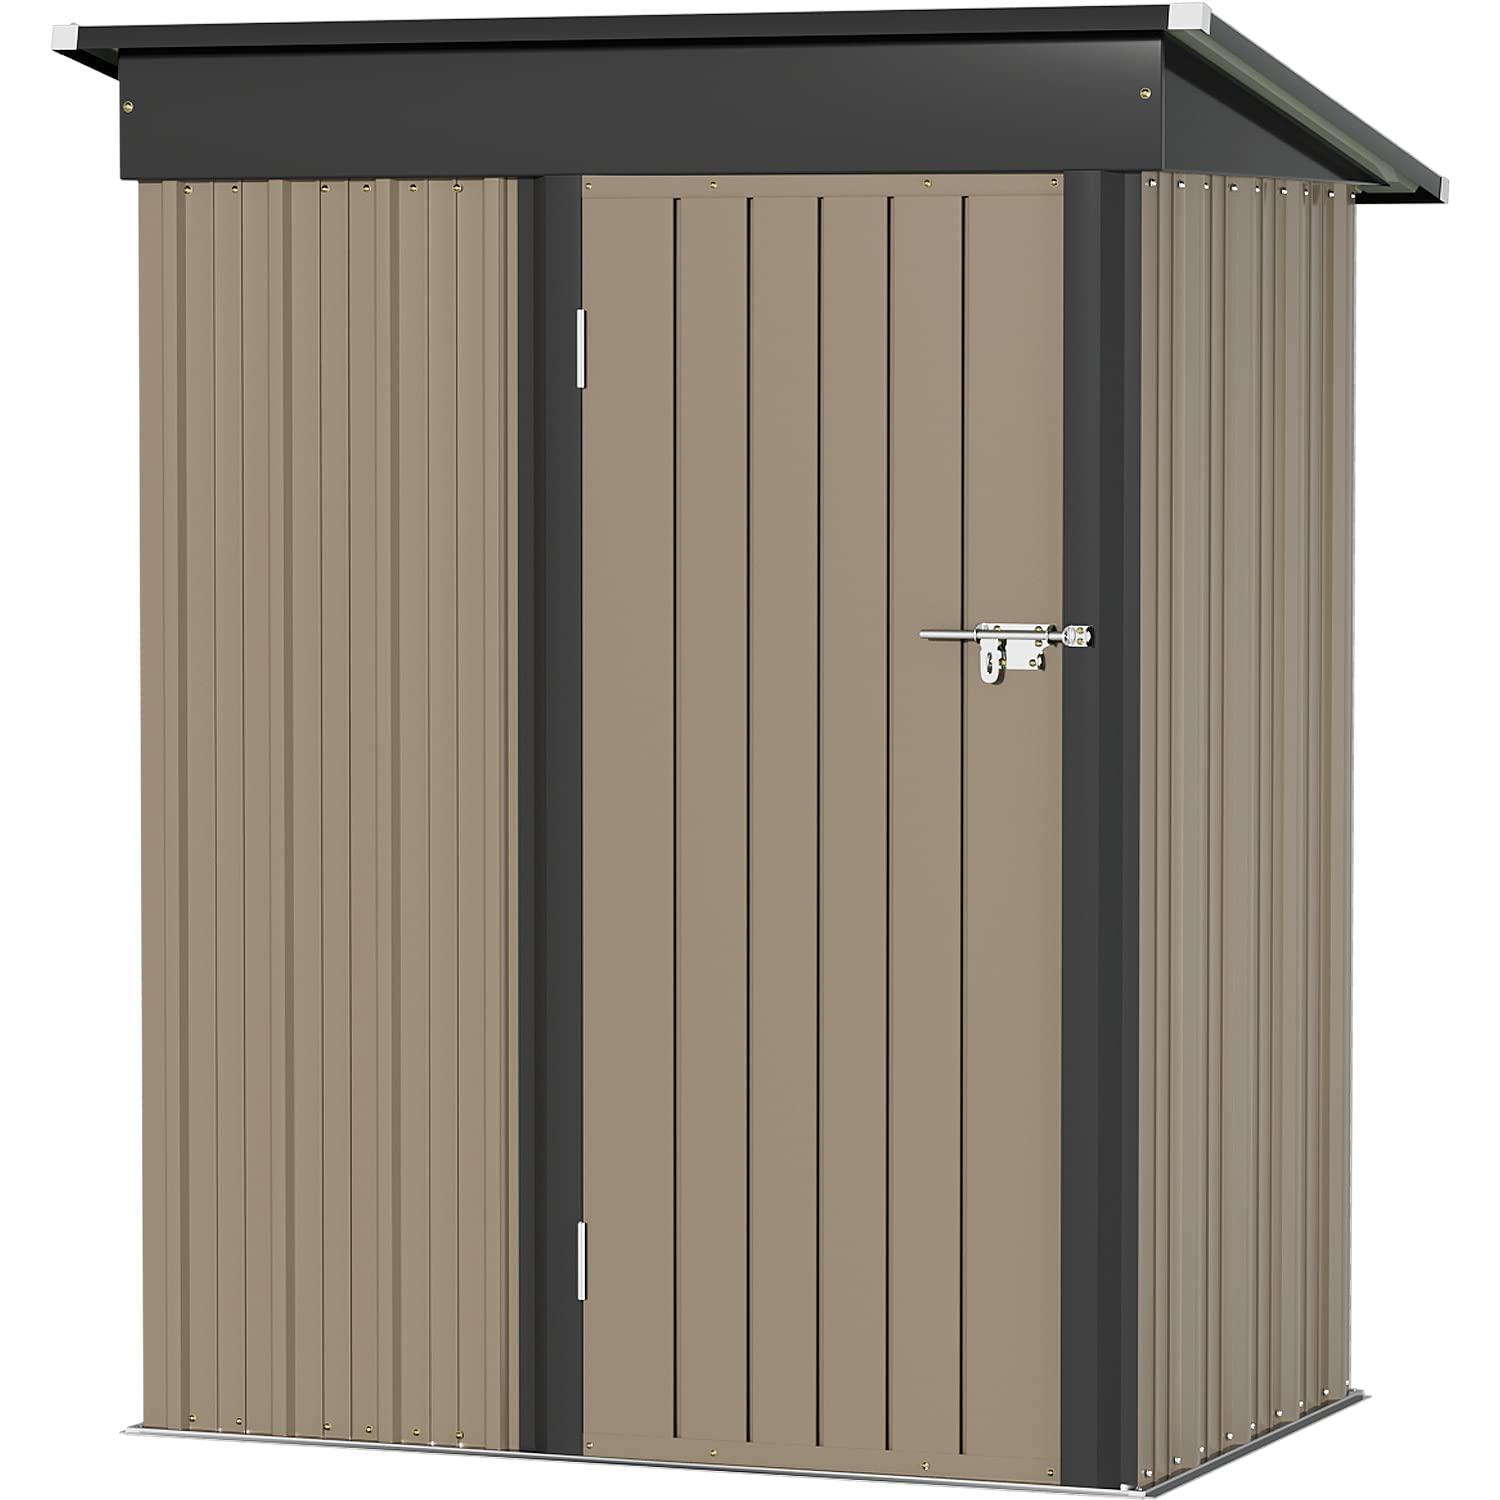 Greesum Metal Outdoor Storage Shed 5FT x 3FT, Steel Utility Tool Shed Storage House with Door & Lock, for Backyard Garden Patio Lawn (5' x 3'), Brown - CookCave